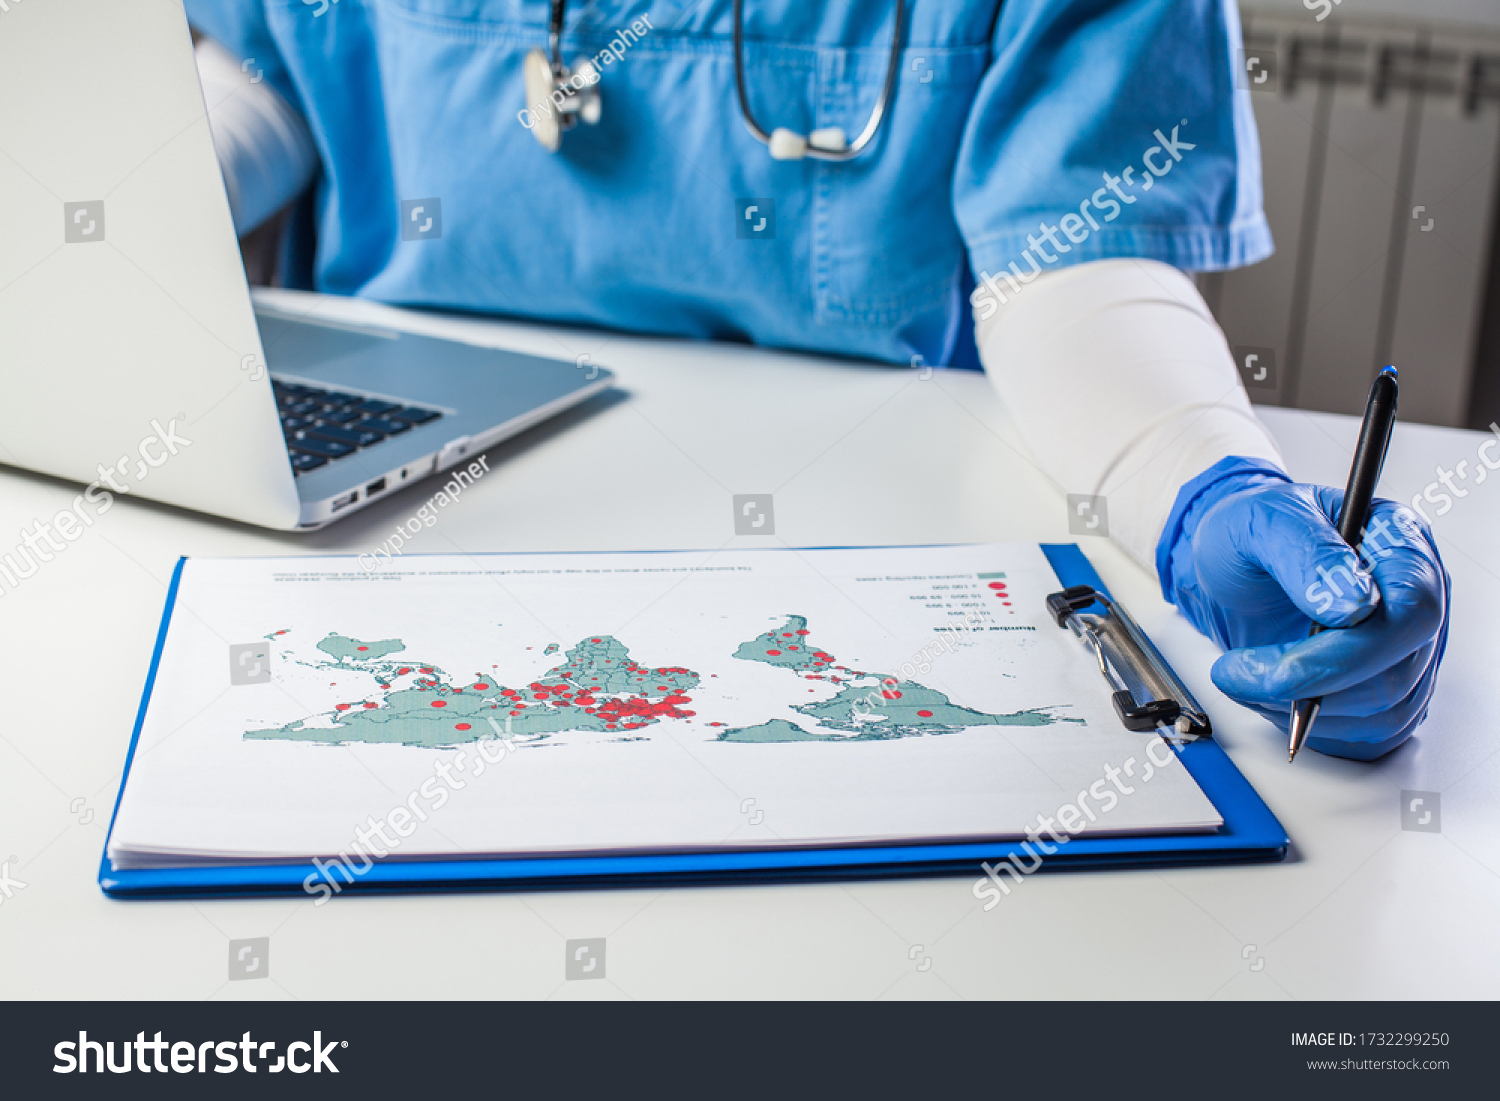 Medical worker analyzing COVID-19 world map,Coronavirus global pandemic outbreak crisis,stats showing worldwide number of infected patients,death toll and mortality rate,possible infection new wave #1732299250